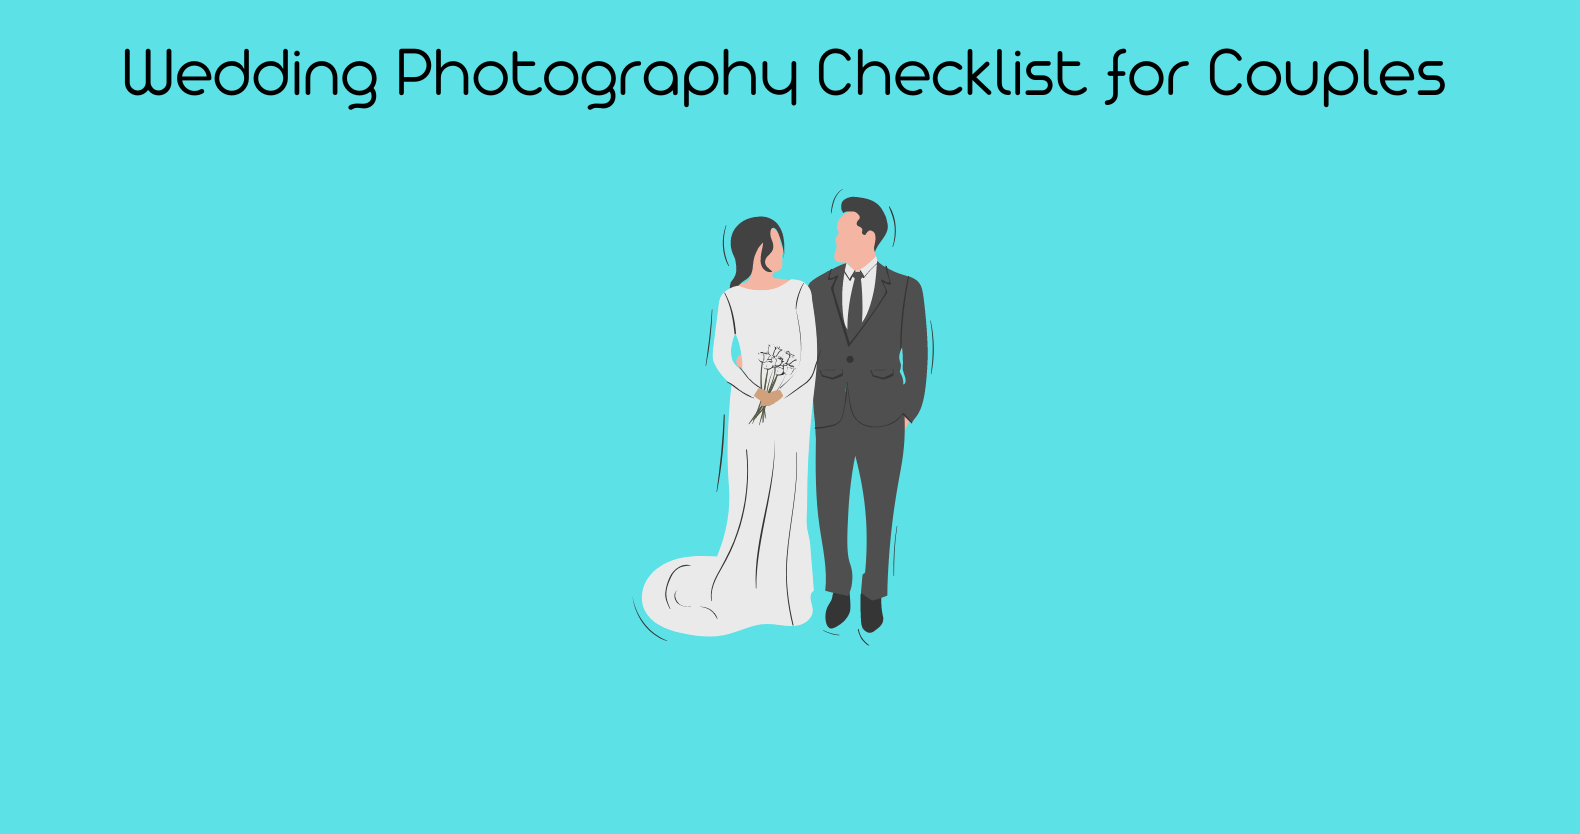 Wedding Photography Checklist for Couples